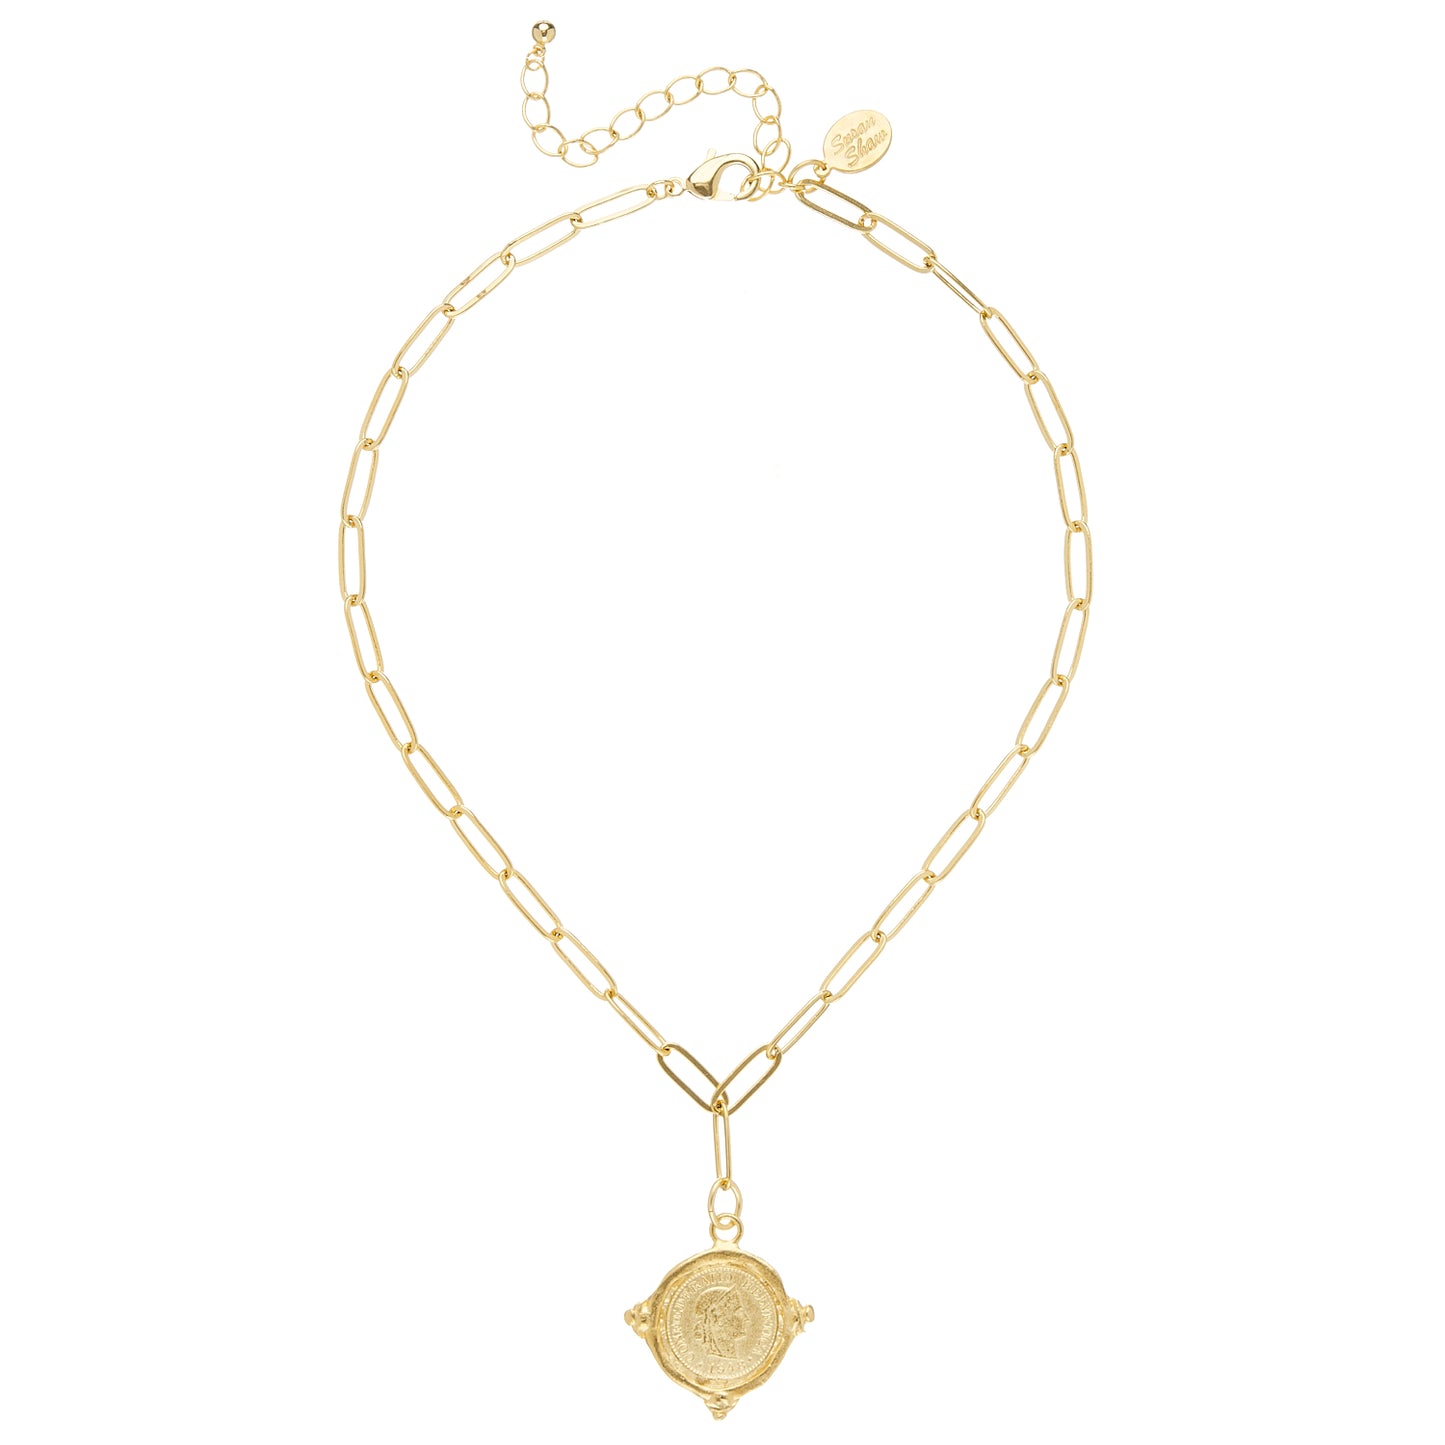 Get ready to feel like a treasure with this unique Paperclip Gold Coin Necklace! Featuring a genuine Italian coin at its center, this 24k triple gold plated accessory is handcrafted by the talented Susan Shaw. With a 16" length and 3" extender chain, this necklace is sure to add some playful charm to any outfit.